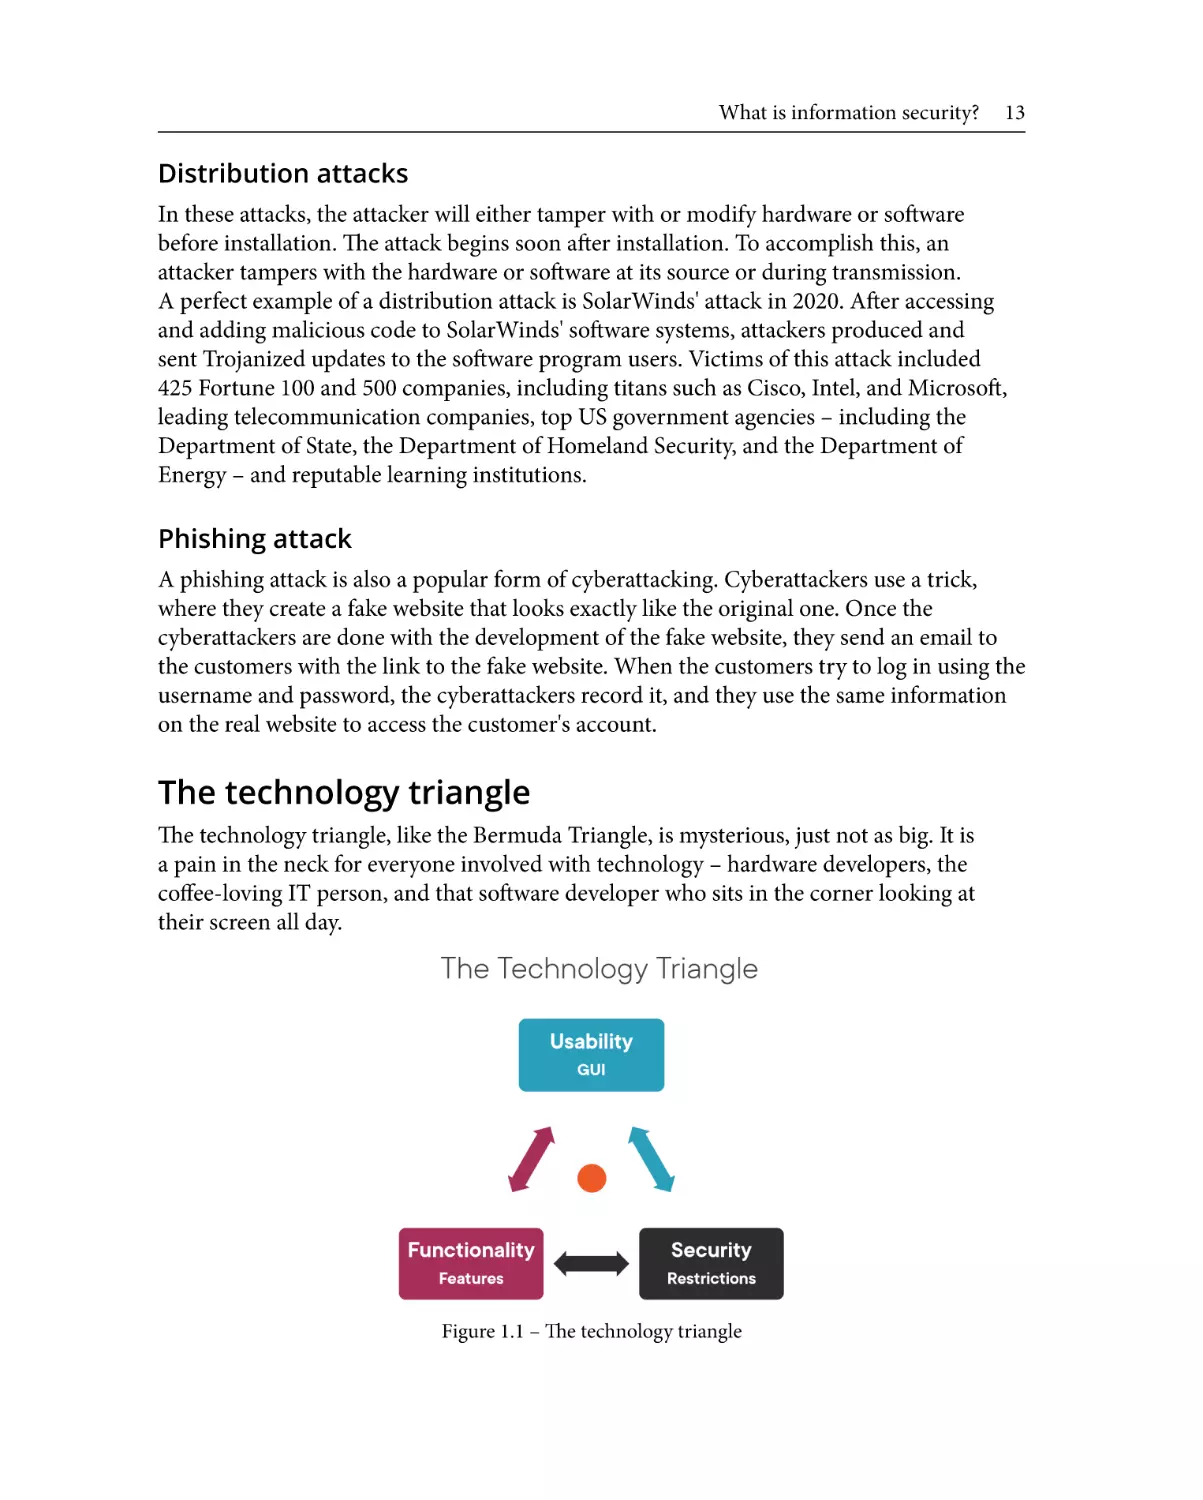 The technology triangle